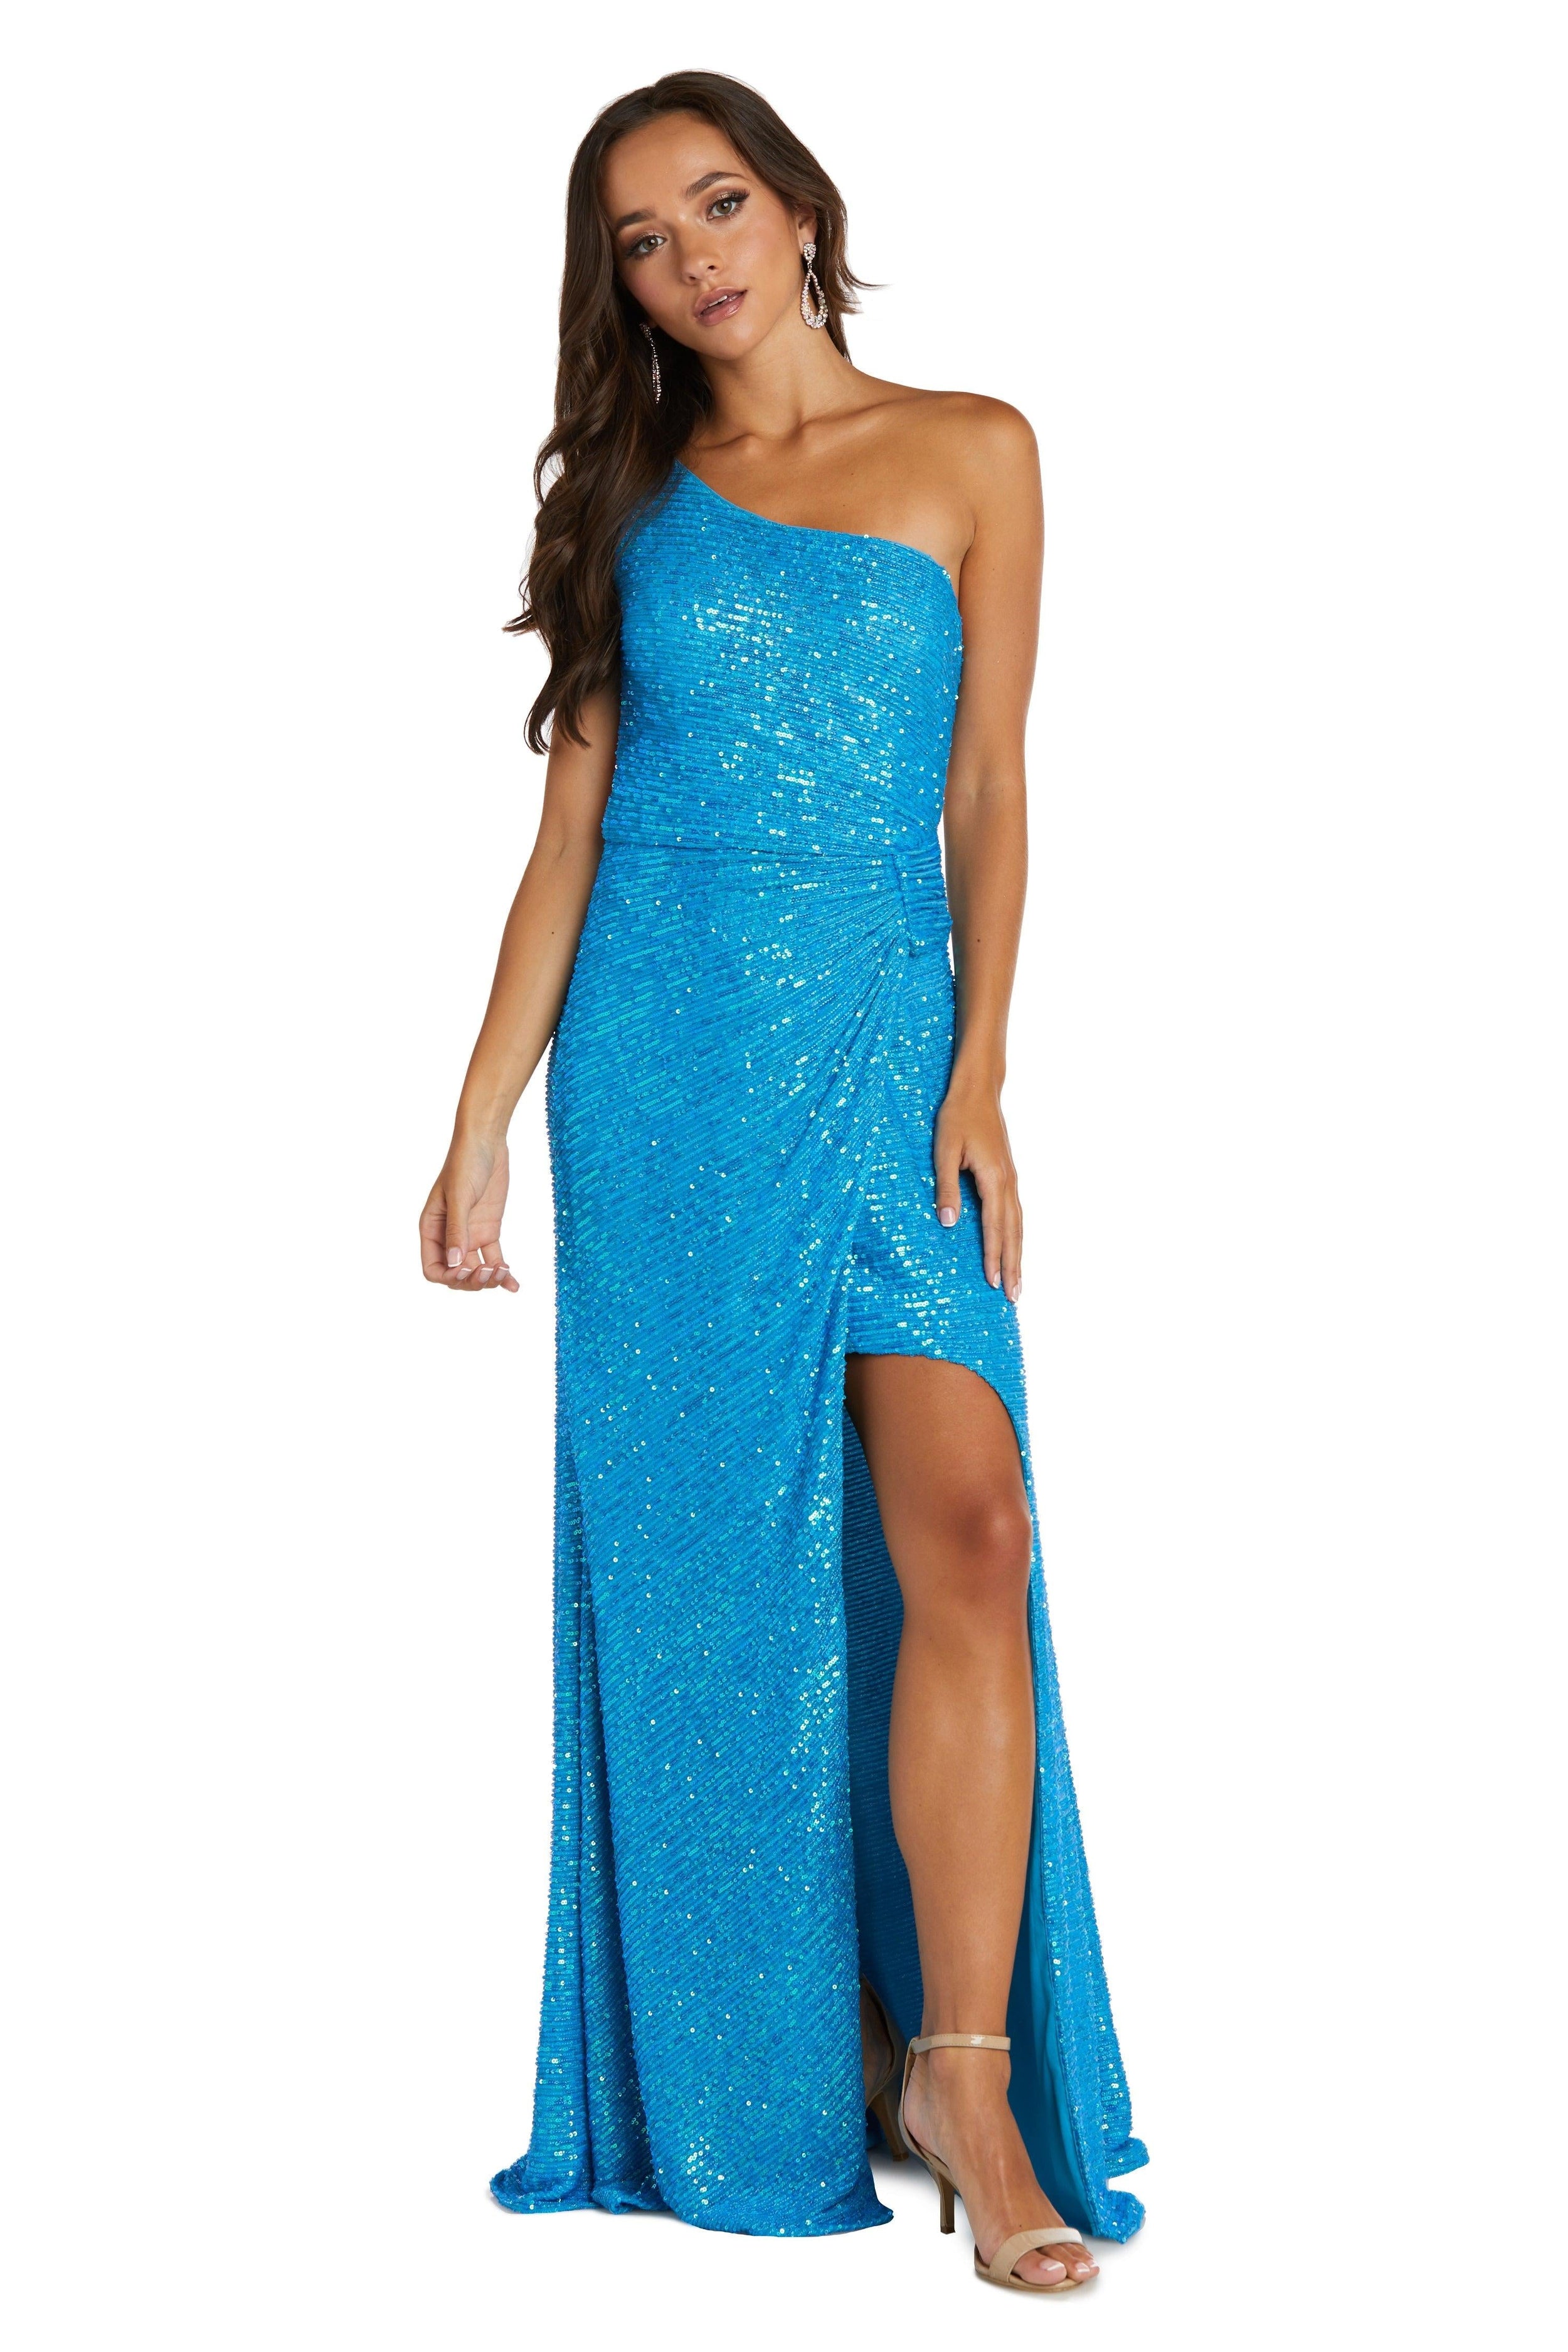 Morgan & Co Long One Shoulder Prom Dress 12992 - The Dress Outlet